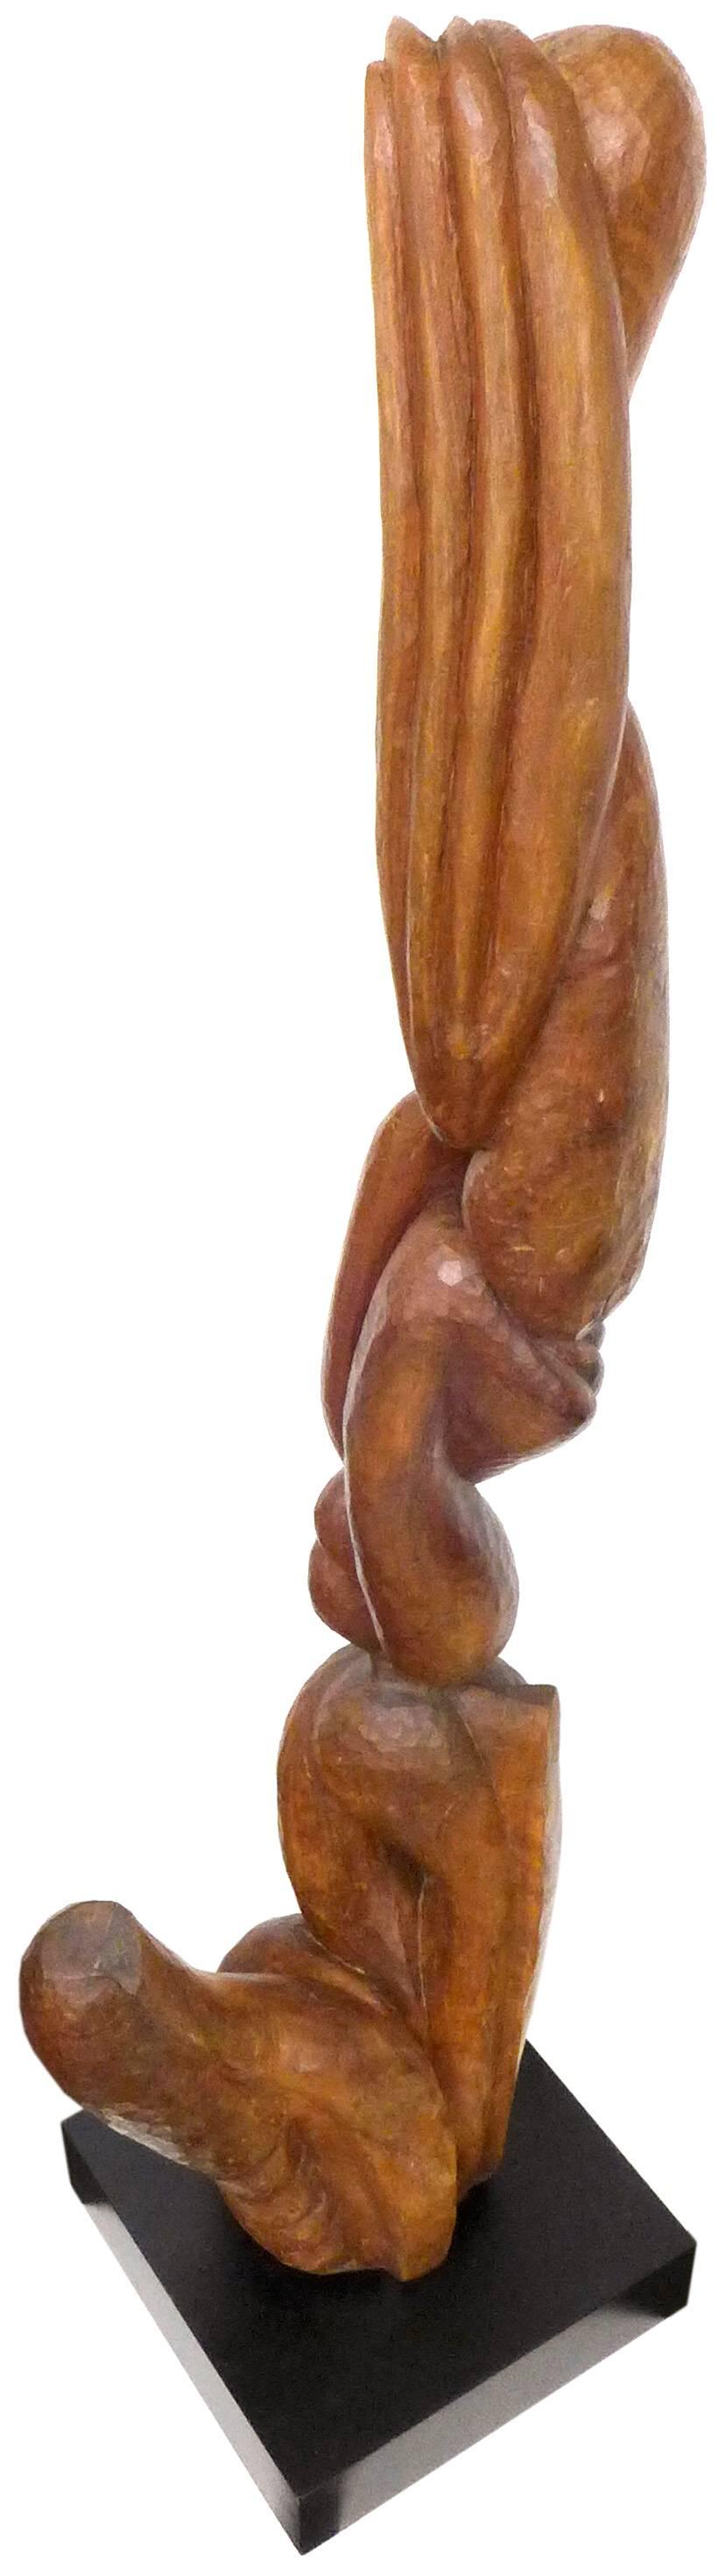 An outstanding abstract carved-wood sculpture. A beautifully crafted, towering, biomorphic pillar with an intriguing, wonderfully undulating surface; an assortment of secretive openings bored-through; a jutting, counterbalancing appendage at the